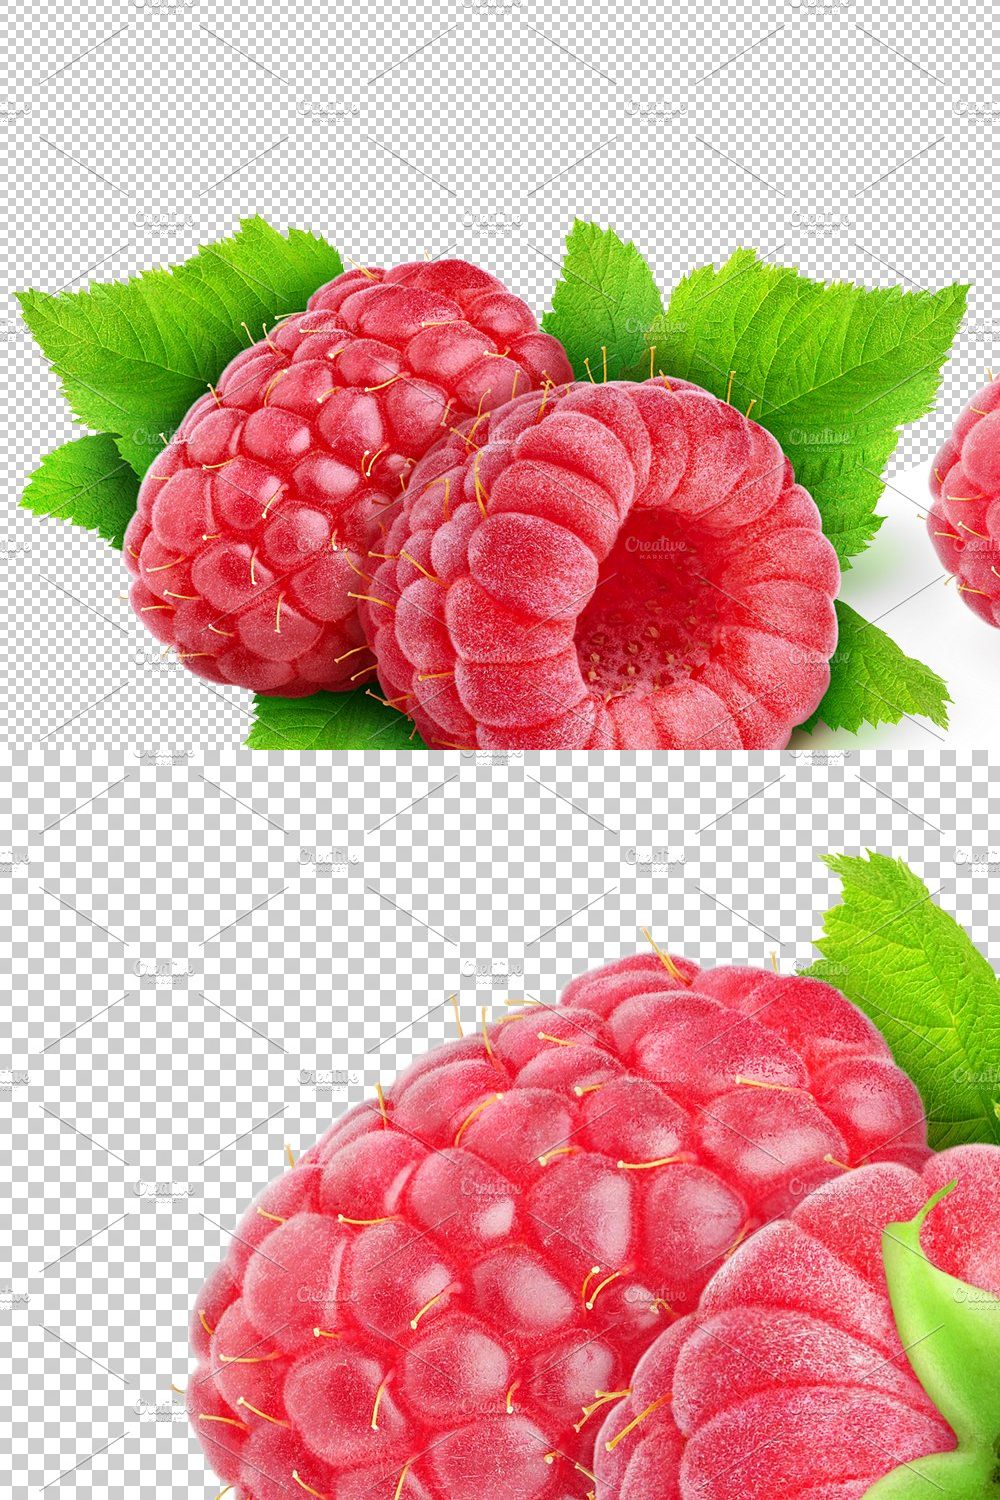 Two raspberries with leaf pinterest preview image.